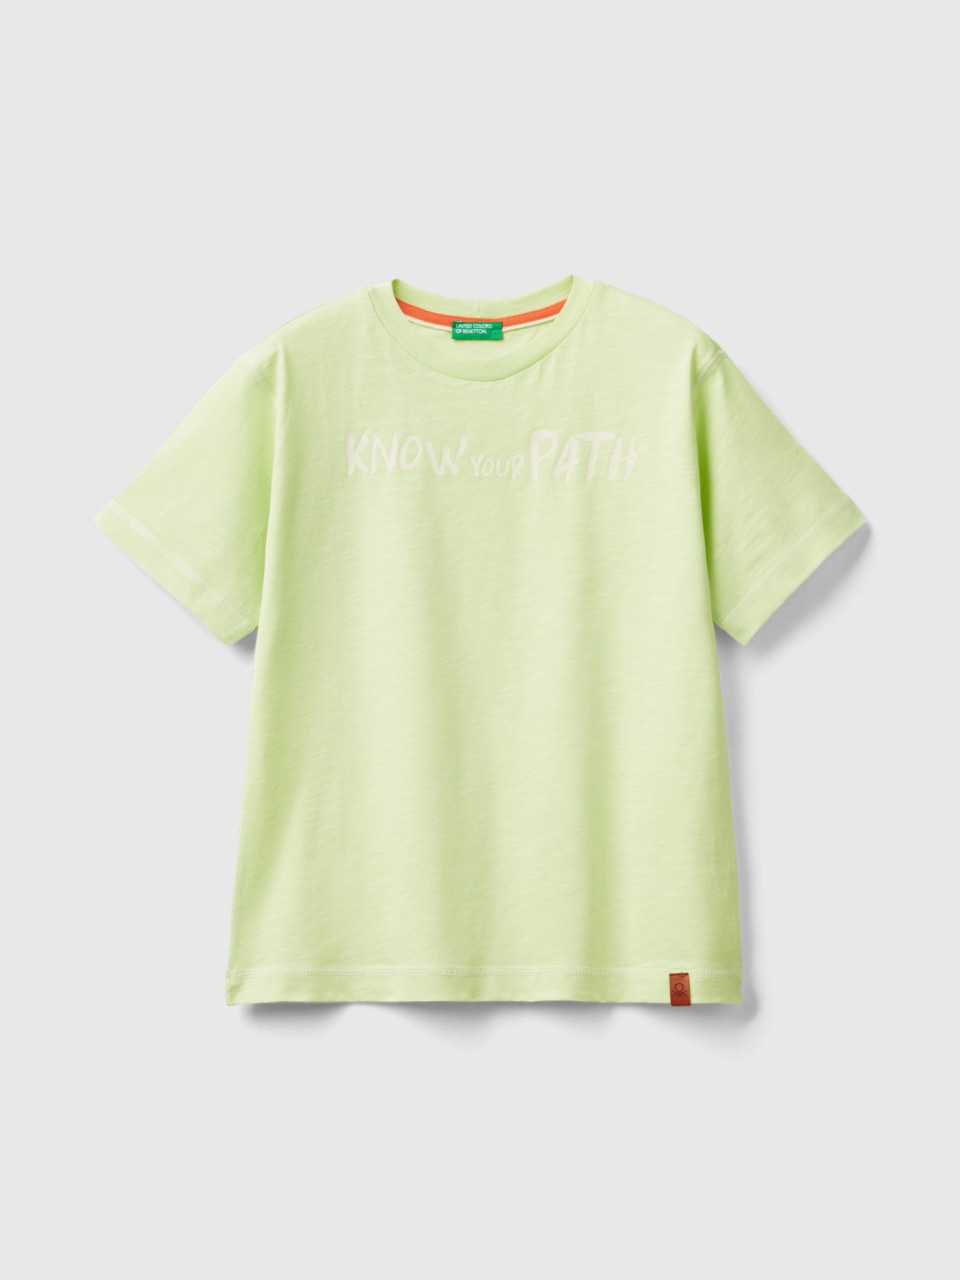 Benetton, T-shirt With Photo Print, Lime, Kids